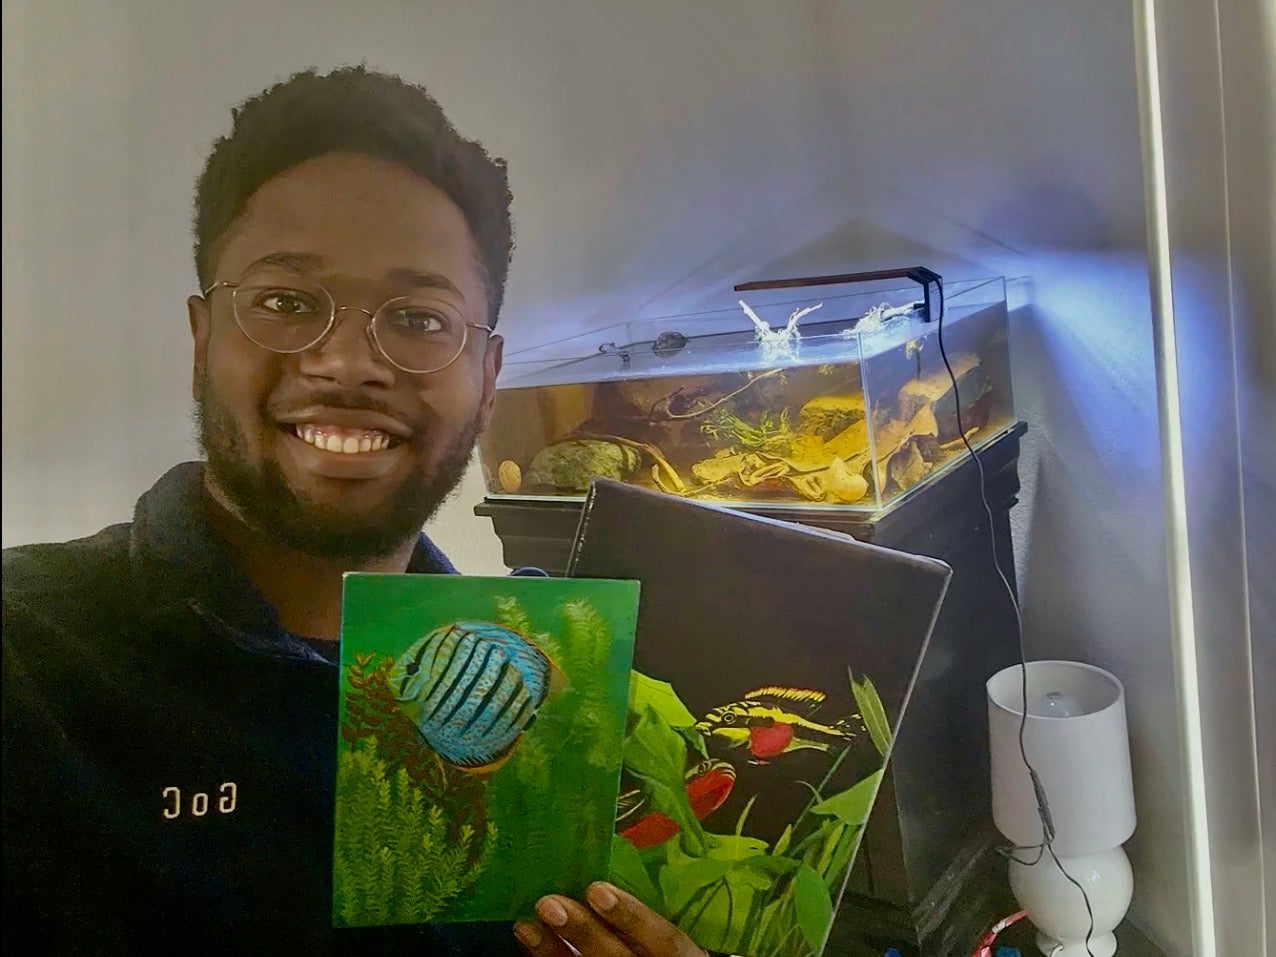 Khalil Russell smiles while holding photos of fish in front of fish tank.